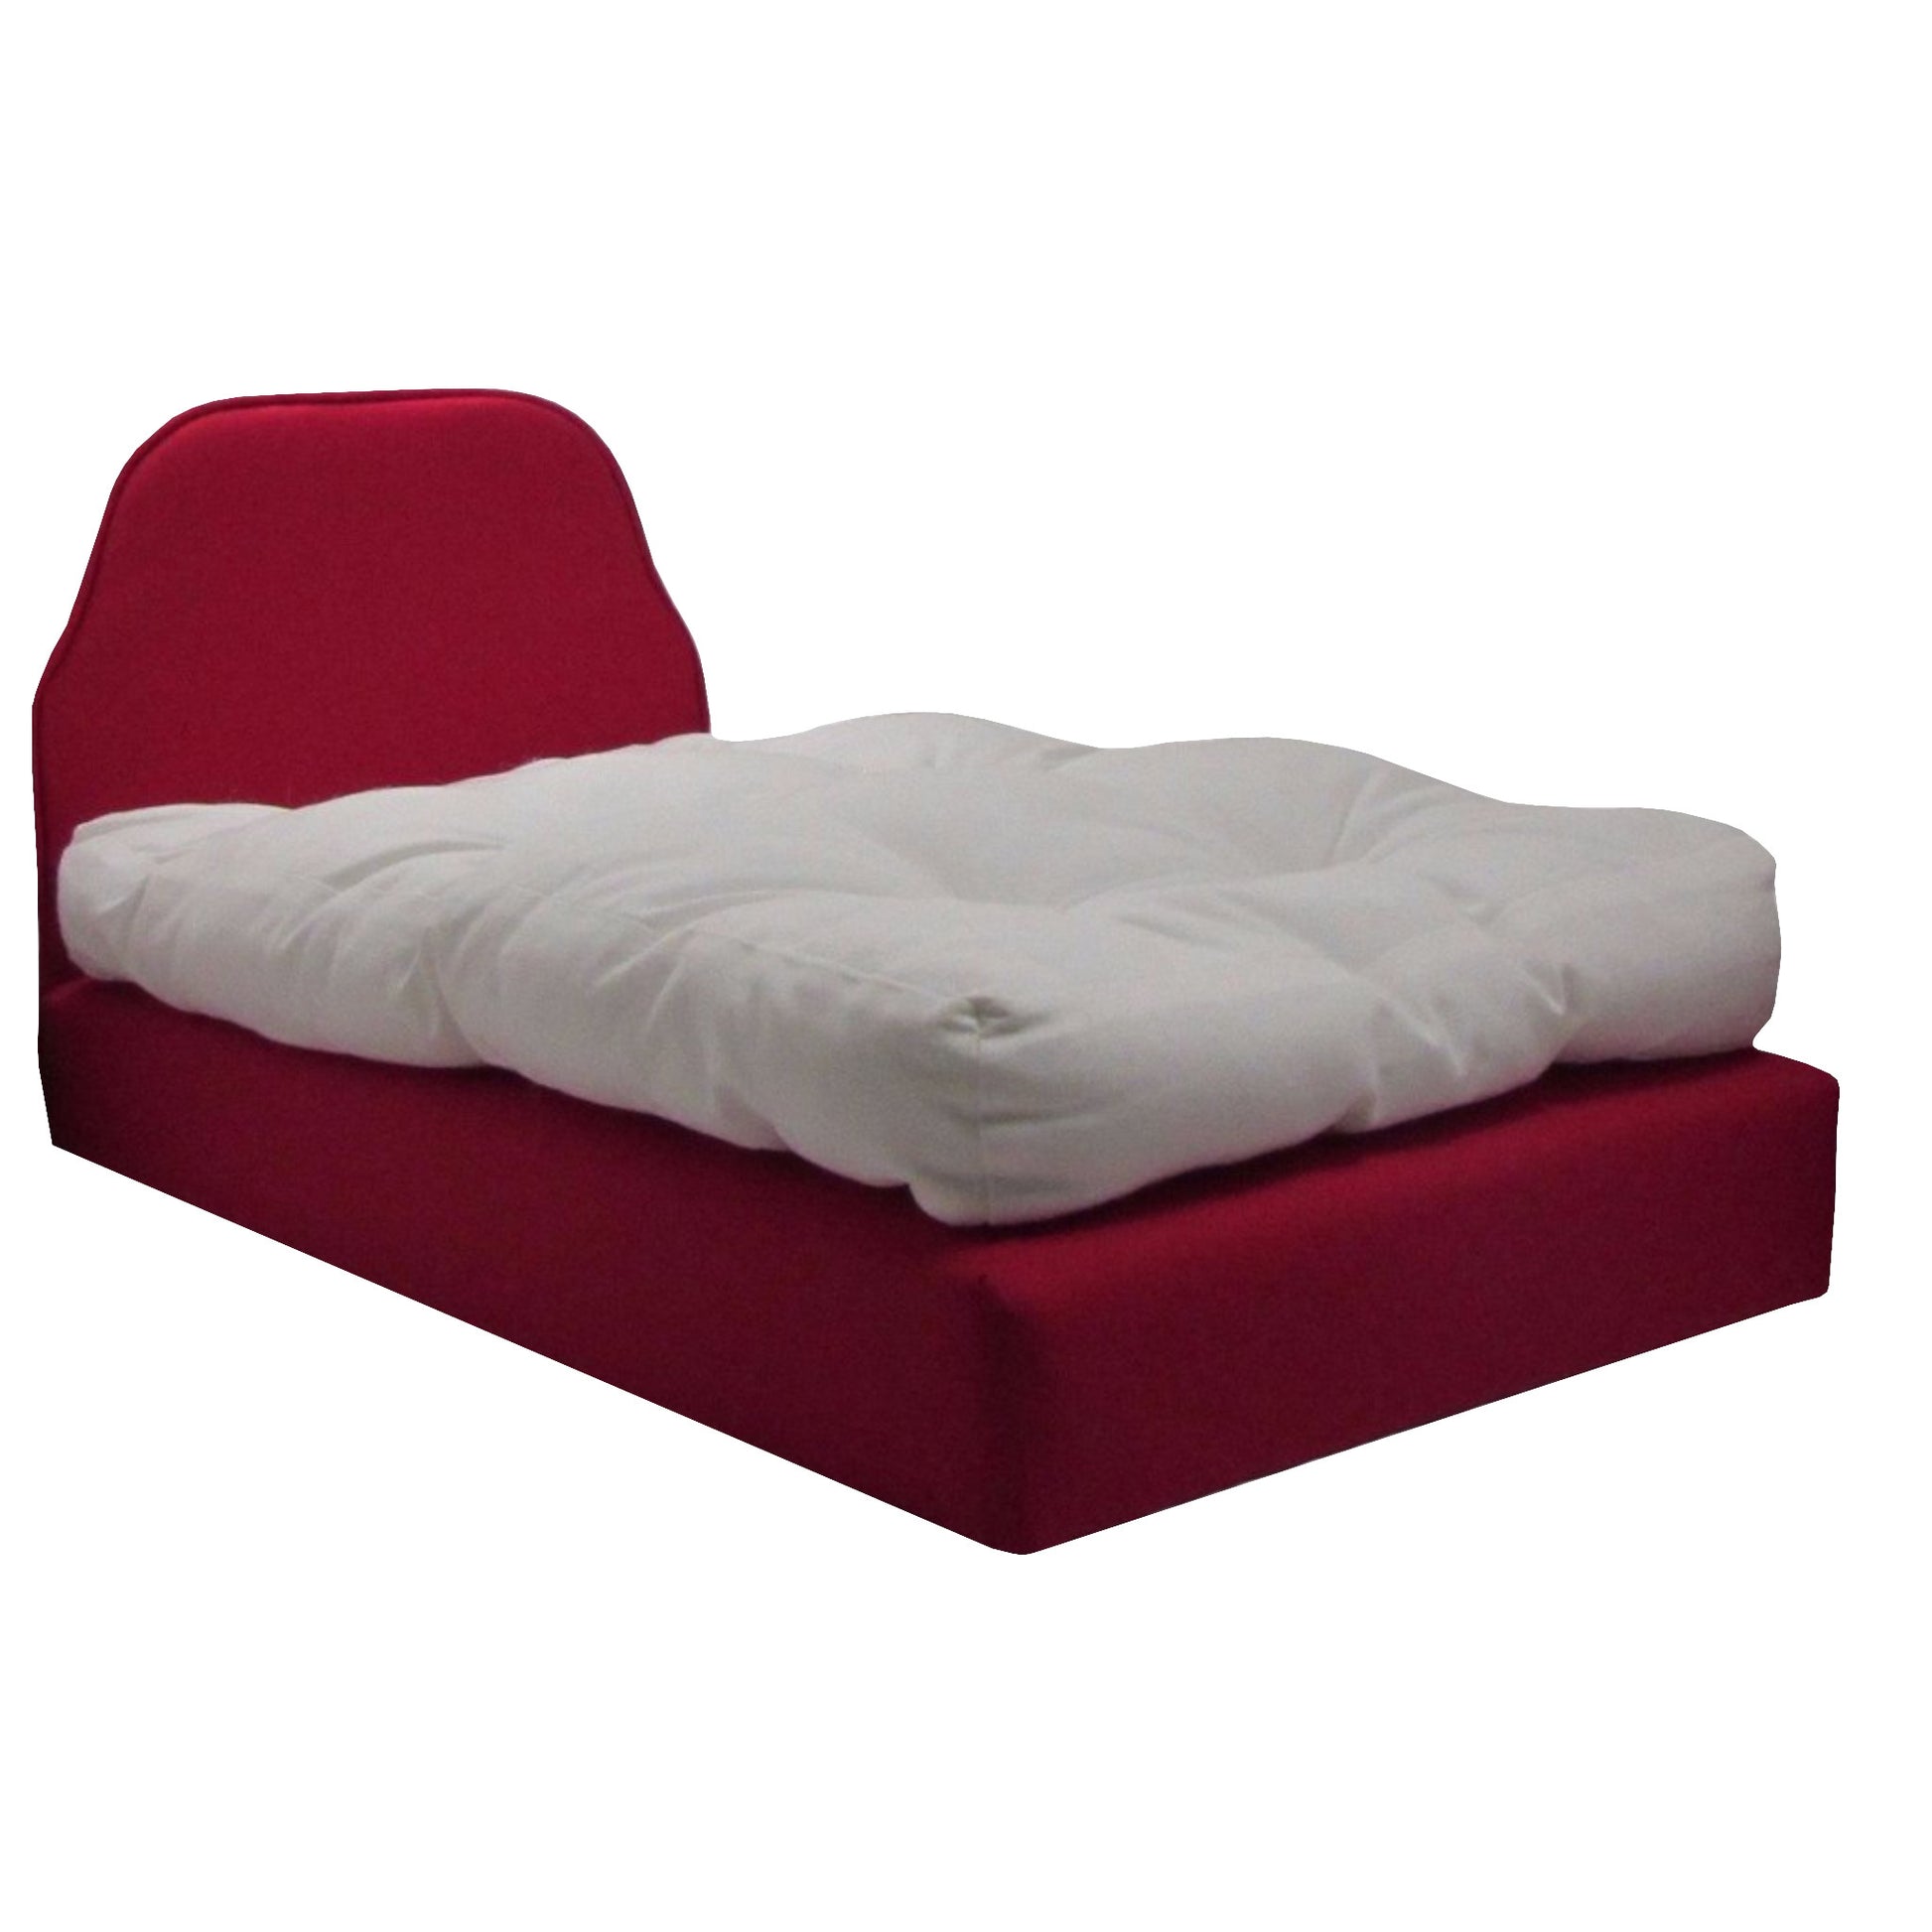 Upholstered Red Doll Bed for 18-inch dolls